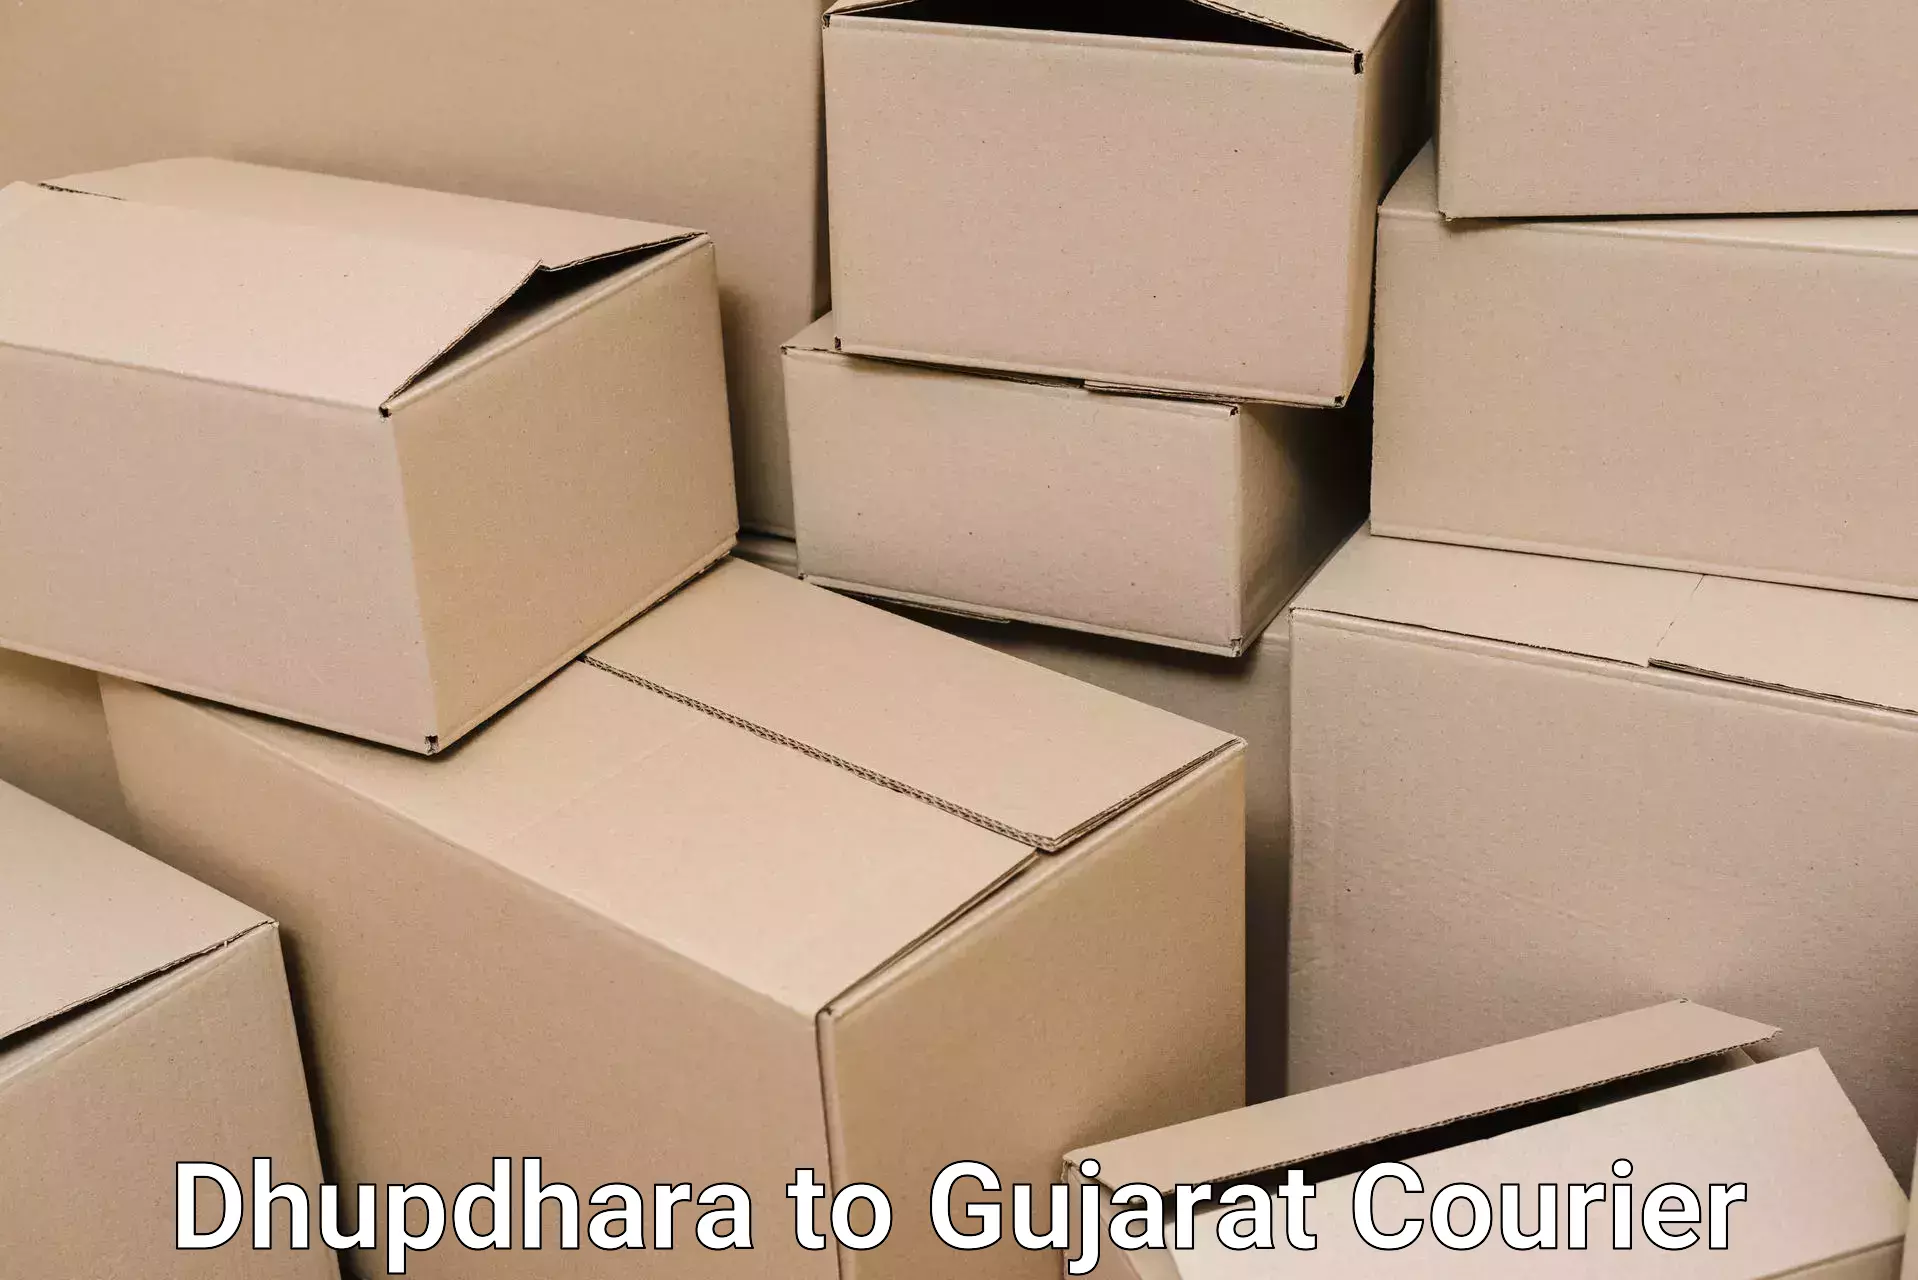 Trusted relocation experts Dhupdhara to Surat